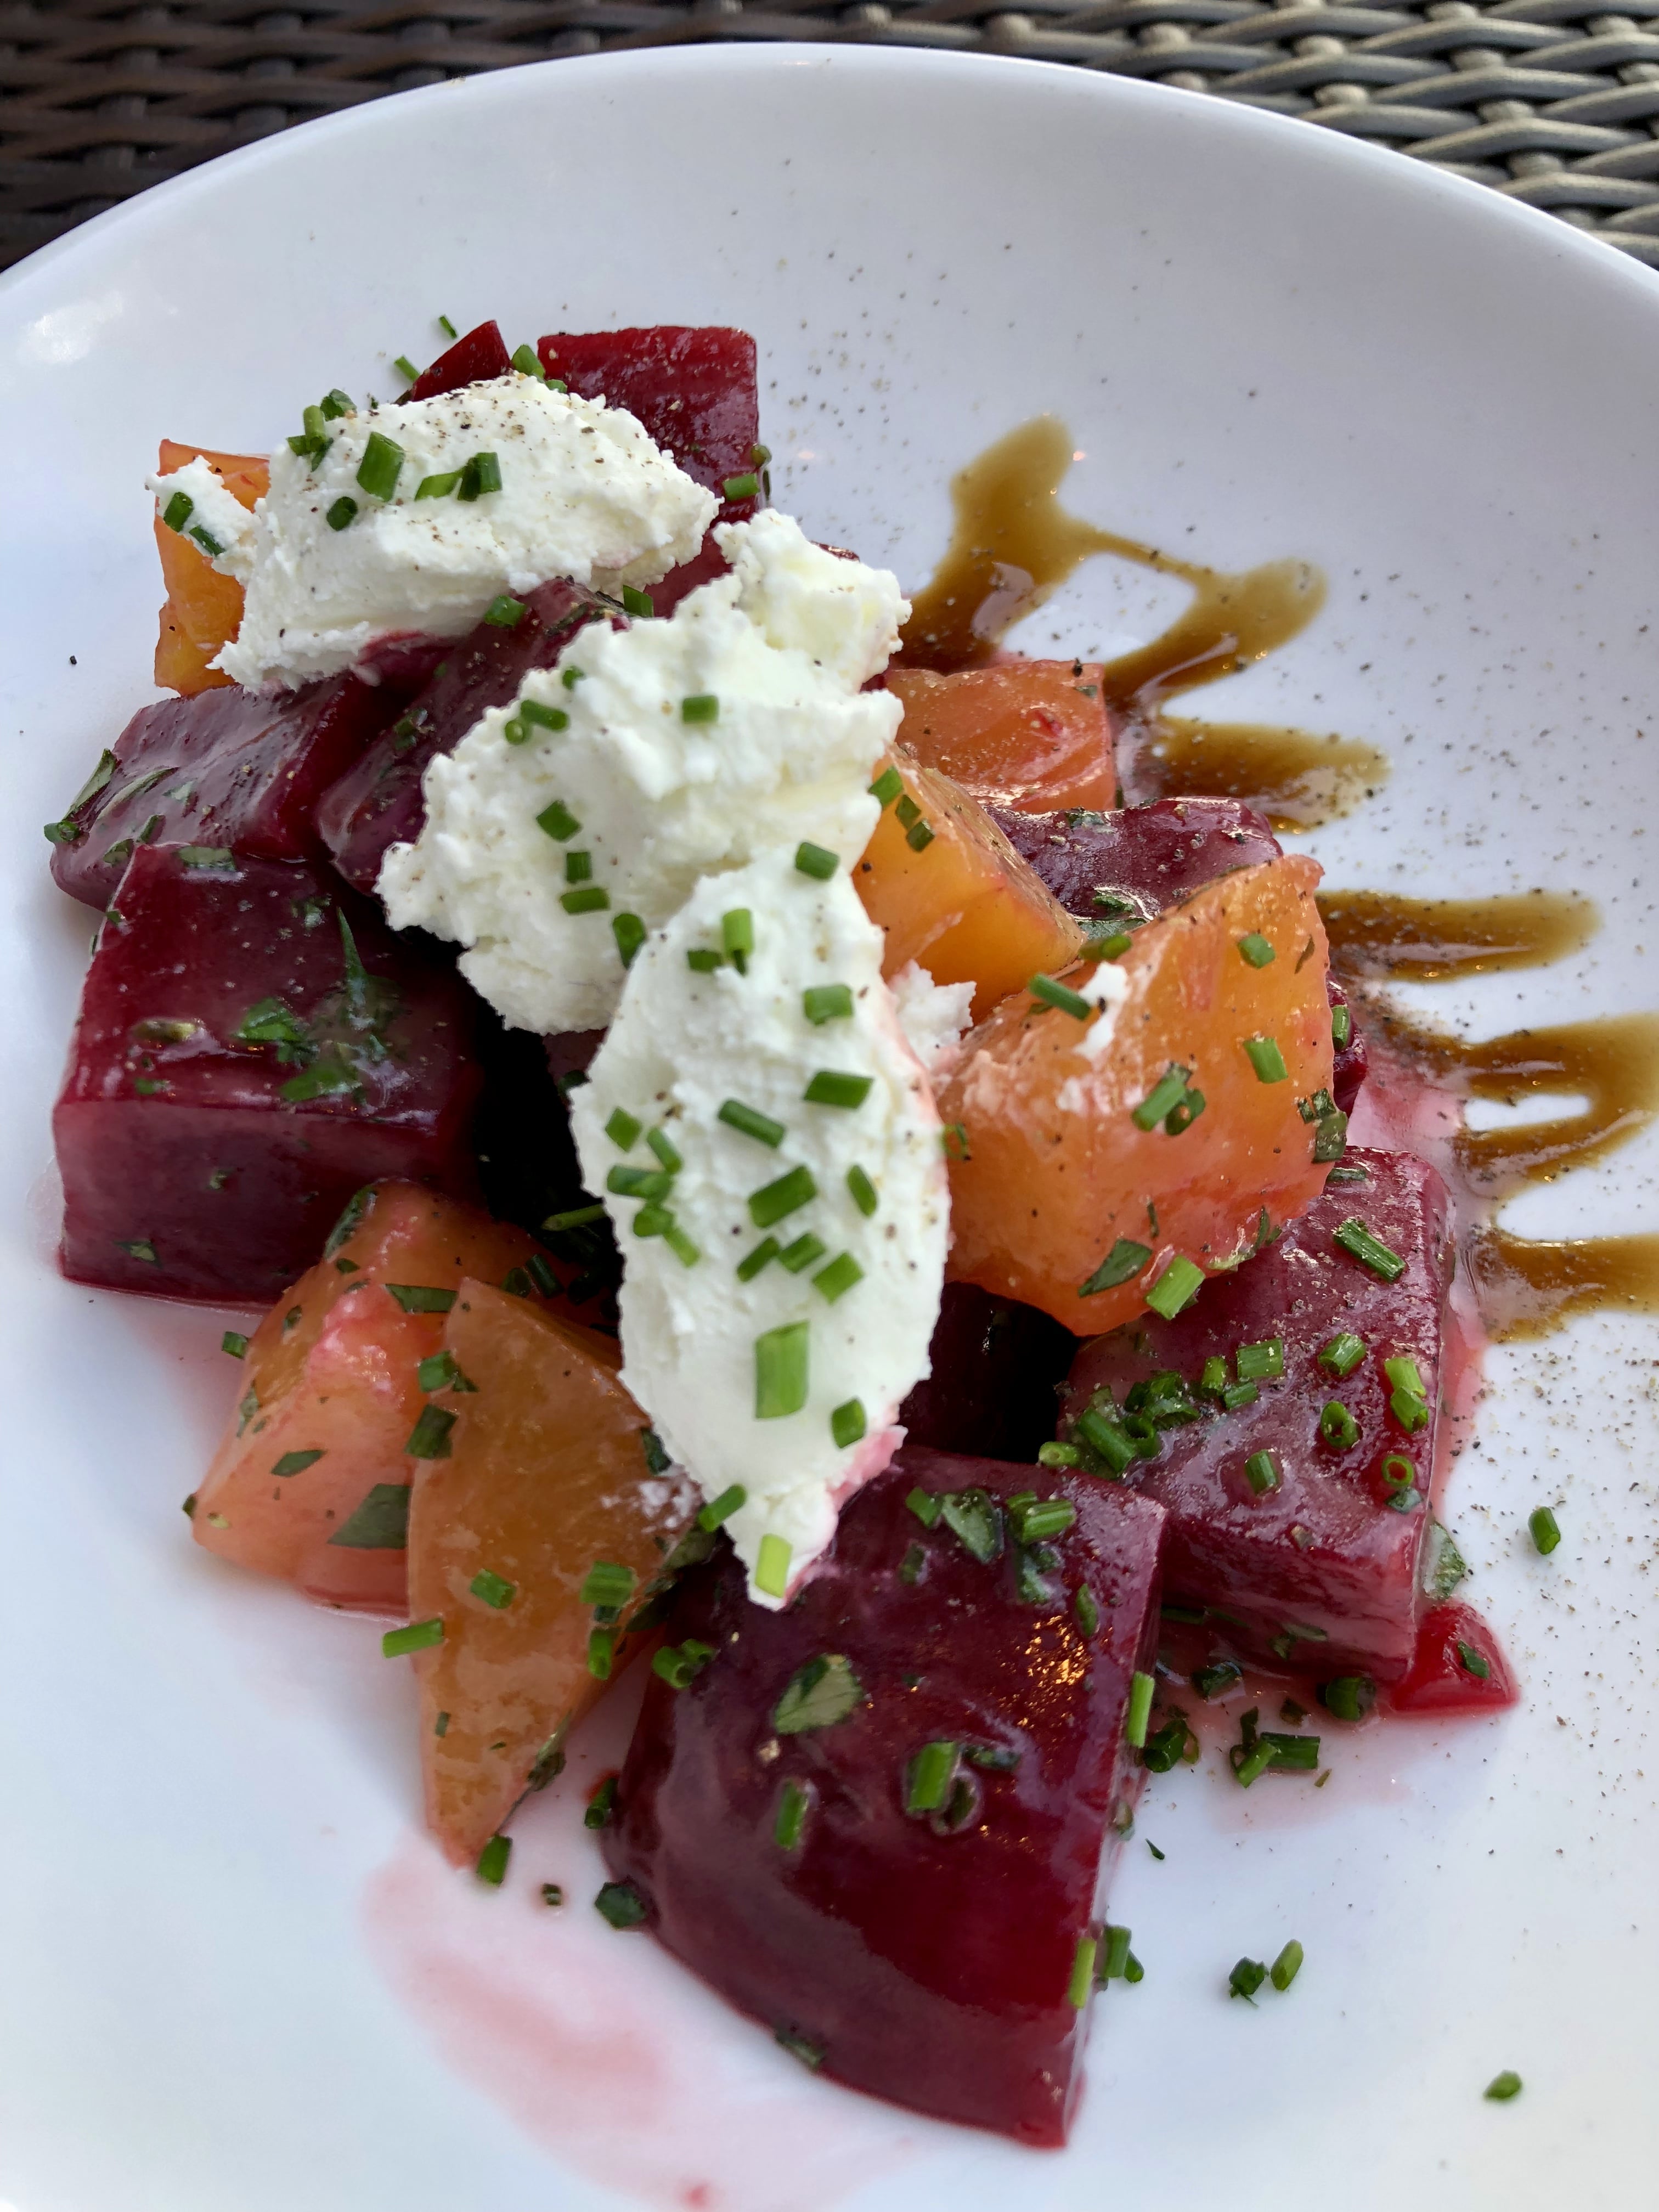 Another Version of Beet Salad